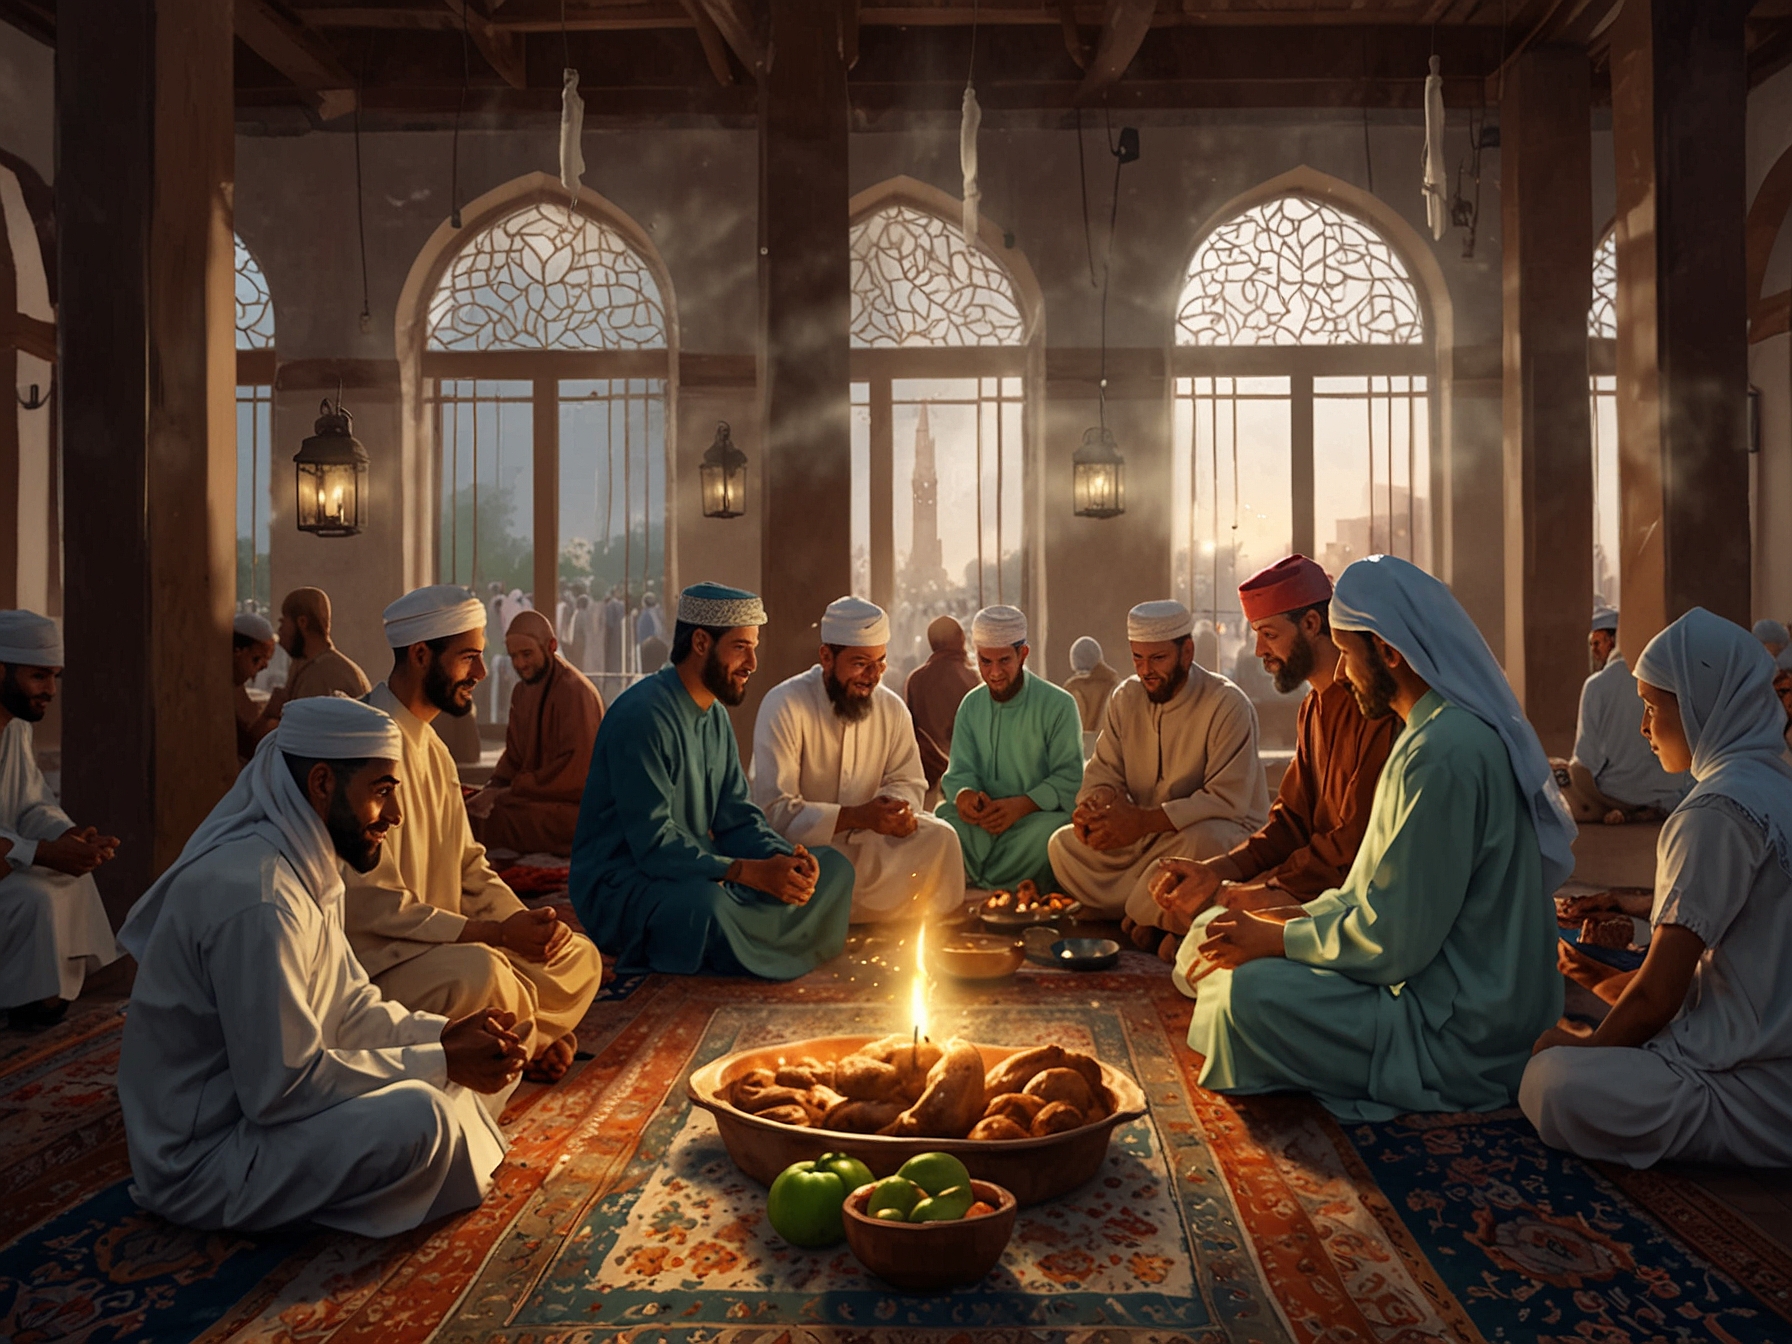 Image depicting a serene community Eid al-Adha celebration with people in traditional attire, engaging in prayers and feasting. This highlights the cultural significance of the holiday.